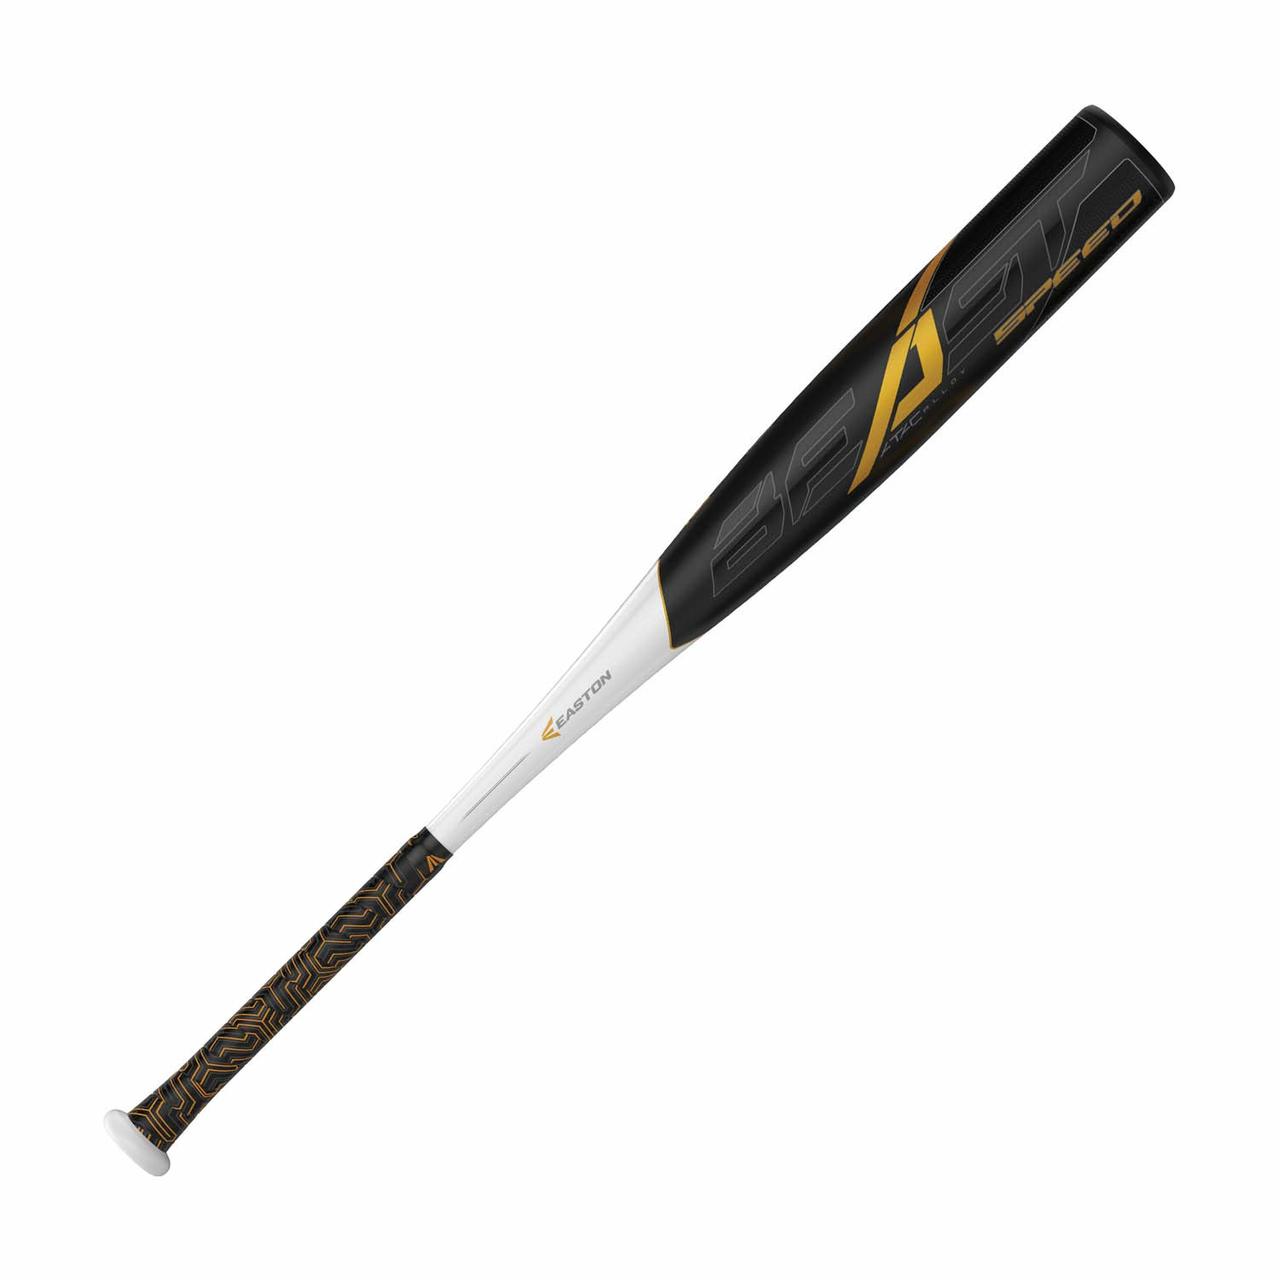 easton-beast-speed-10-usssa-baseball-bat-31-in-21-oz-sl19bs10 SL19BS10-3121 Easton 628412233887 ATAC Alloy –Advanced Thermal Alloy Construction provides the lightest and strongest